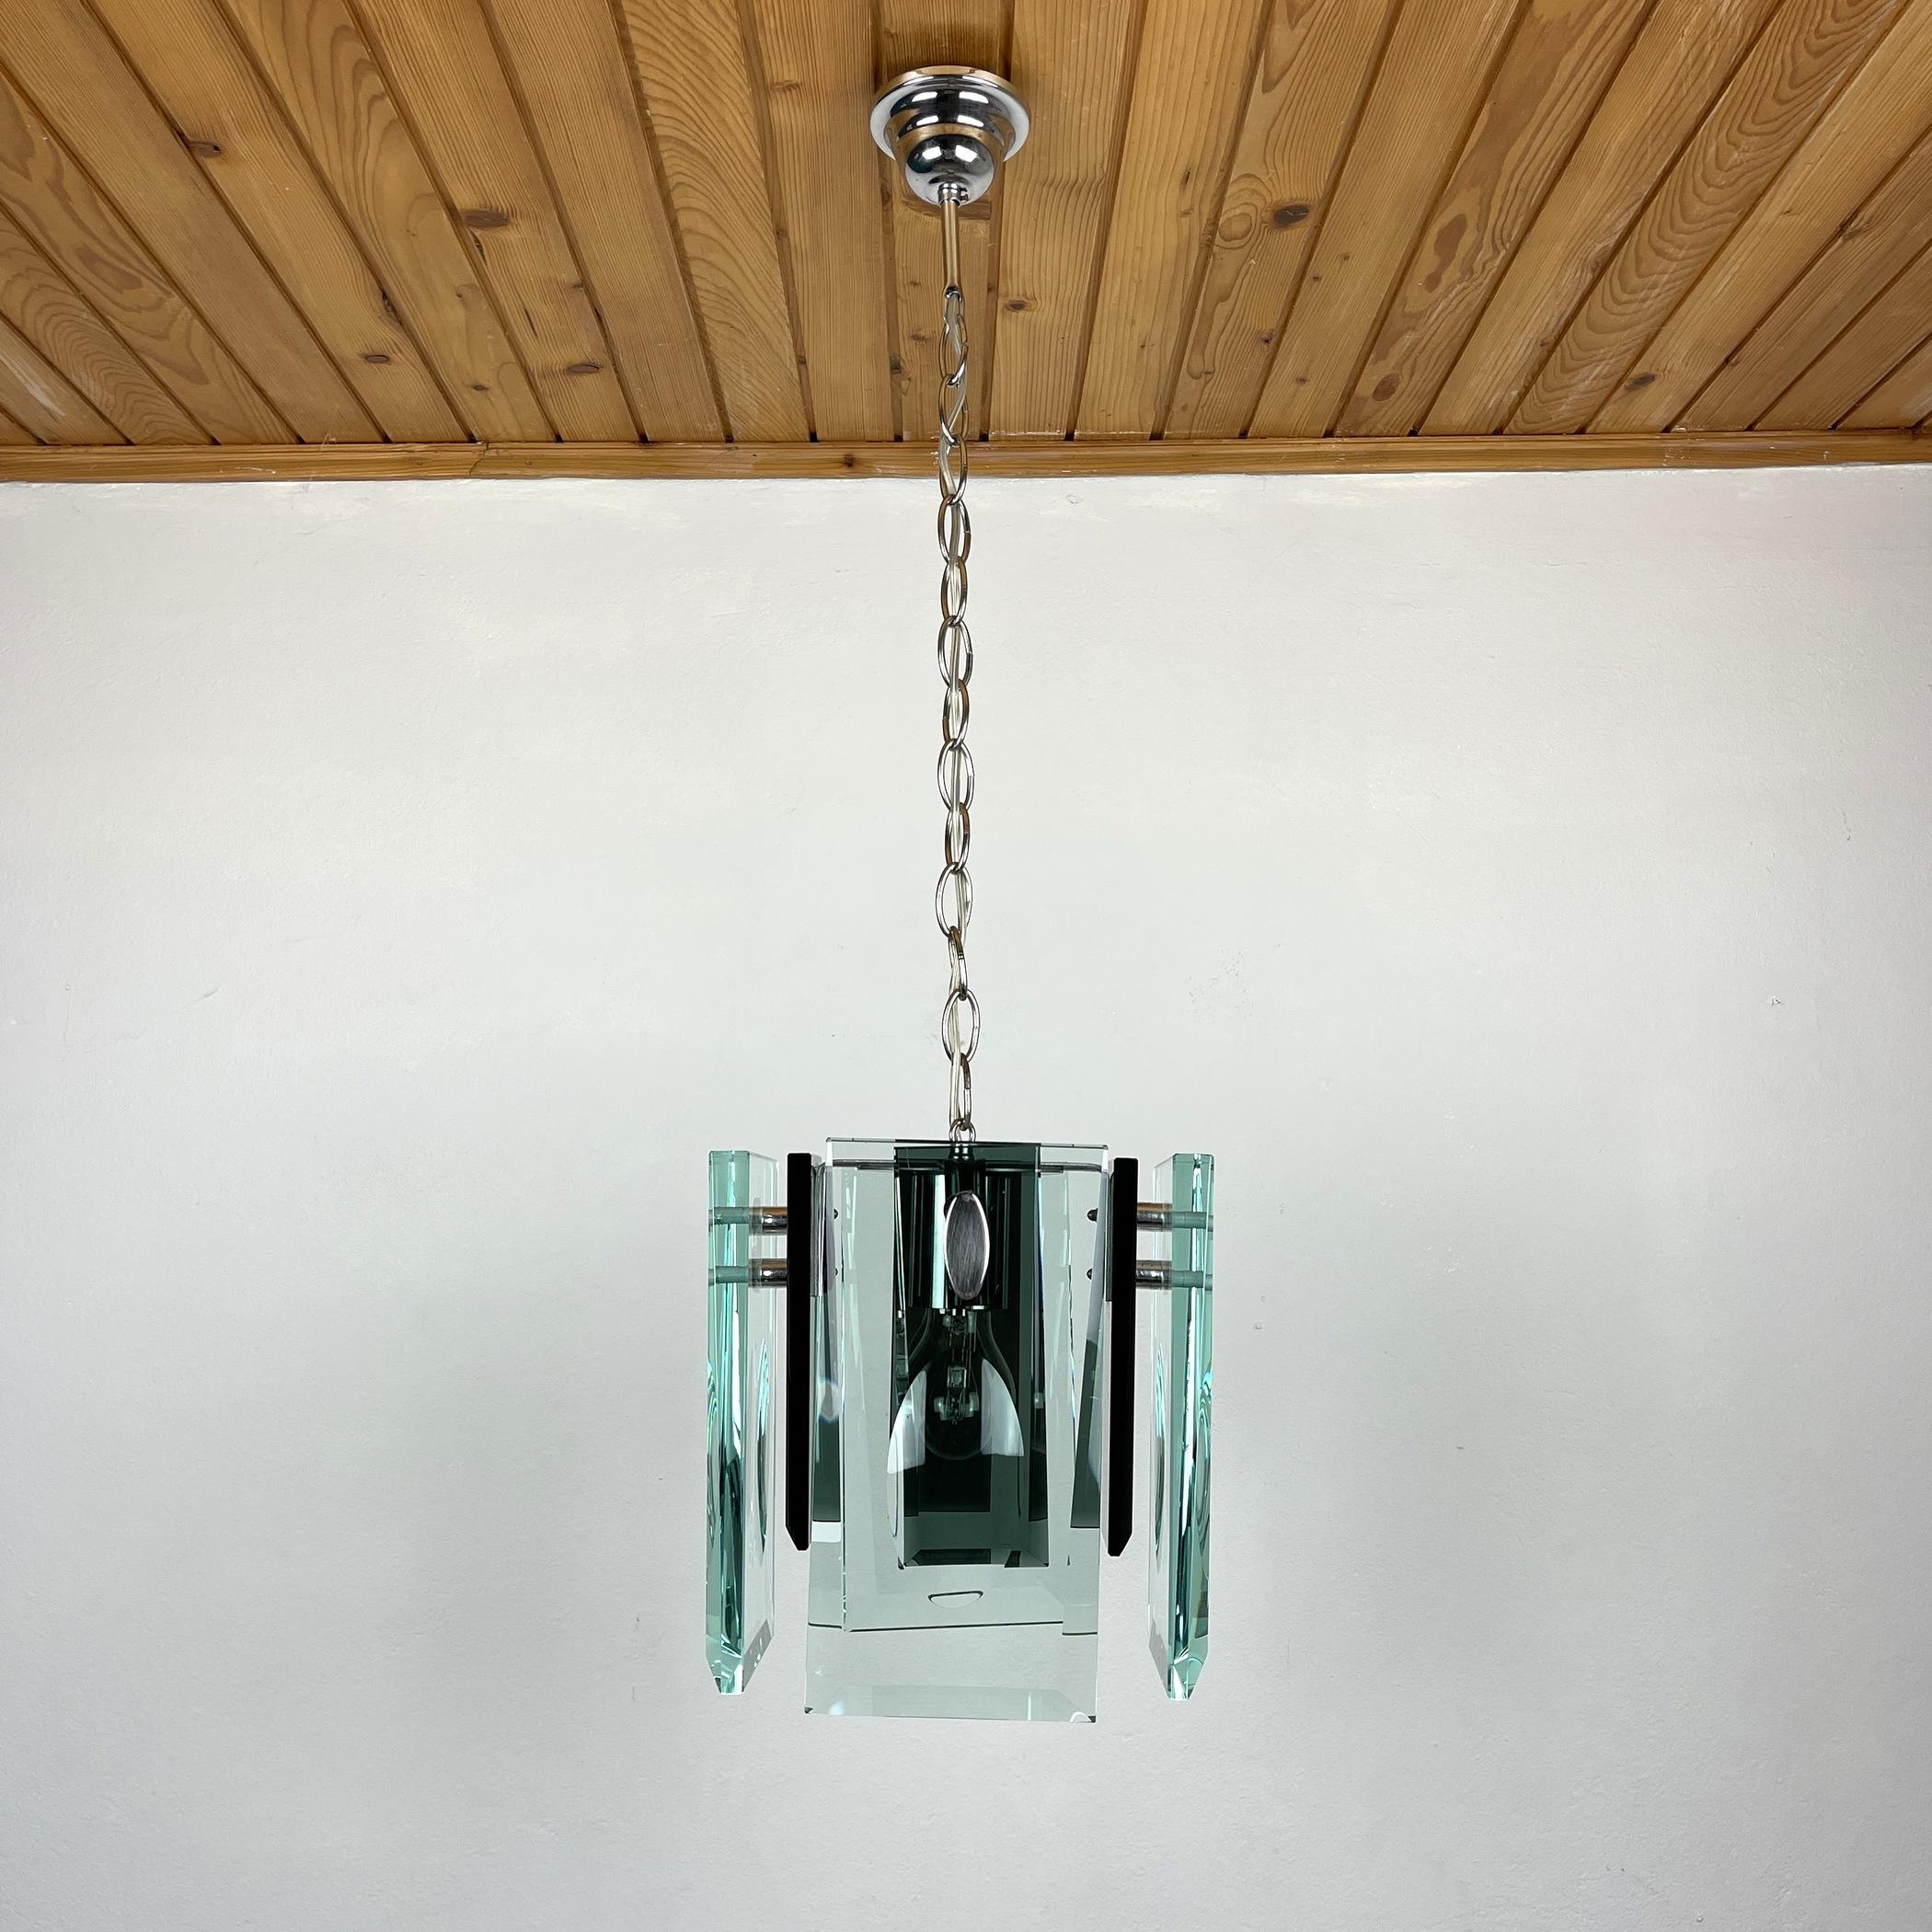 The rare Art glass chandelier by Fontana Arte made in Italy in the 70s. The unusual shape, beautiful thick green art glass creates a beautiful and effective light. Beautiful pale glass pieces have been shaped and highly polished with beveled ends to